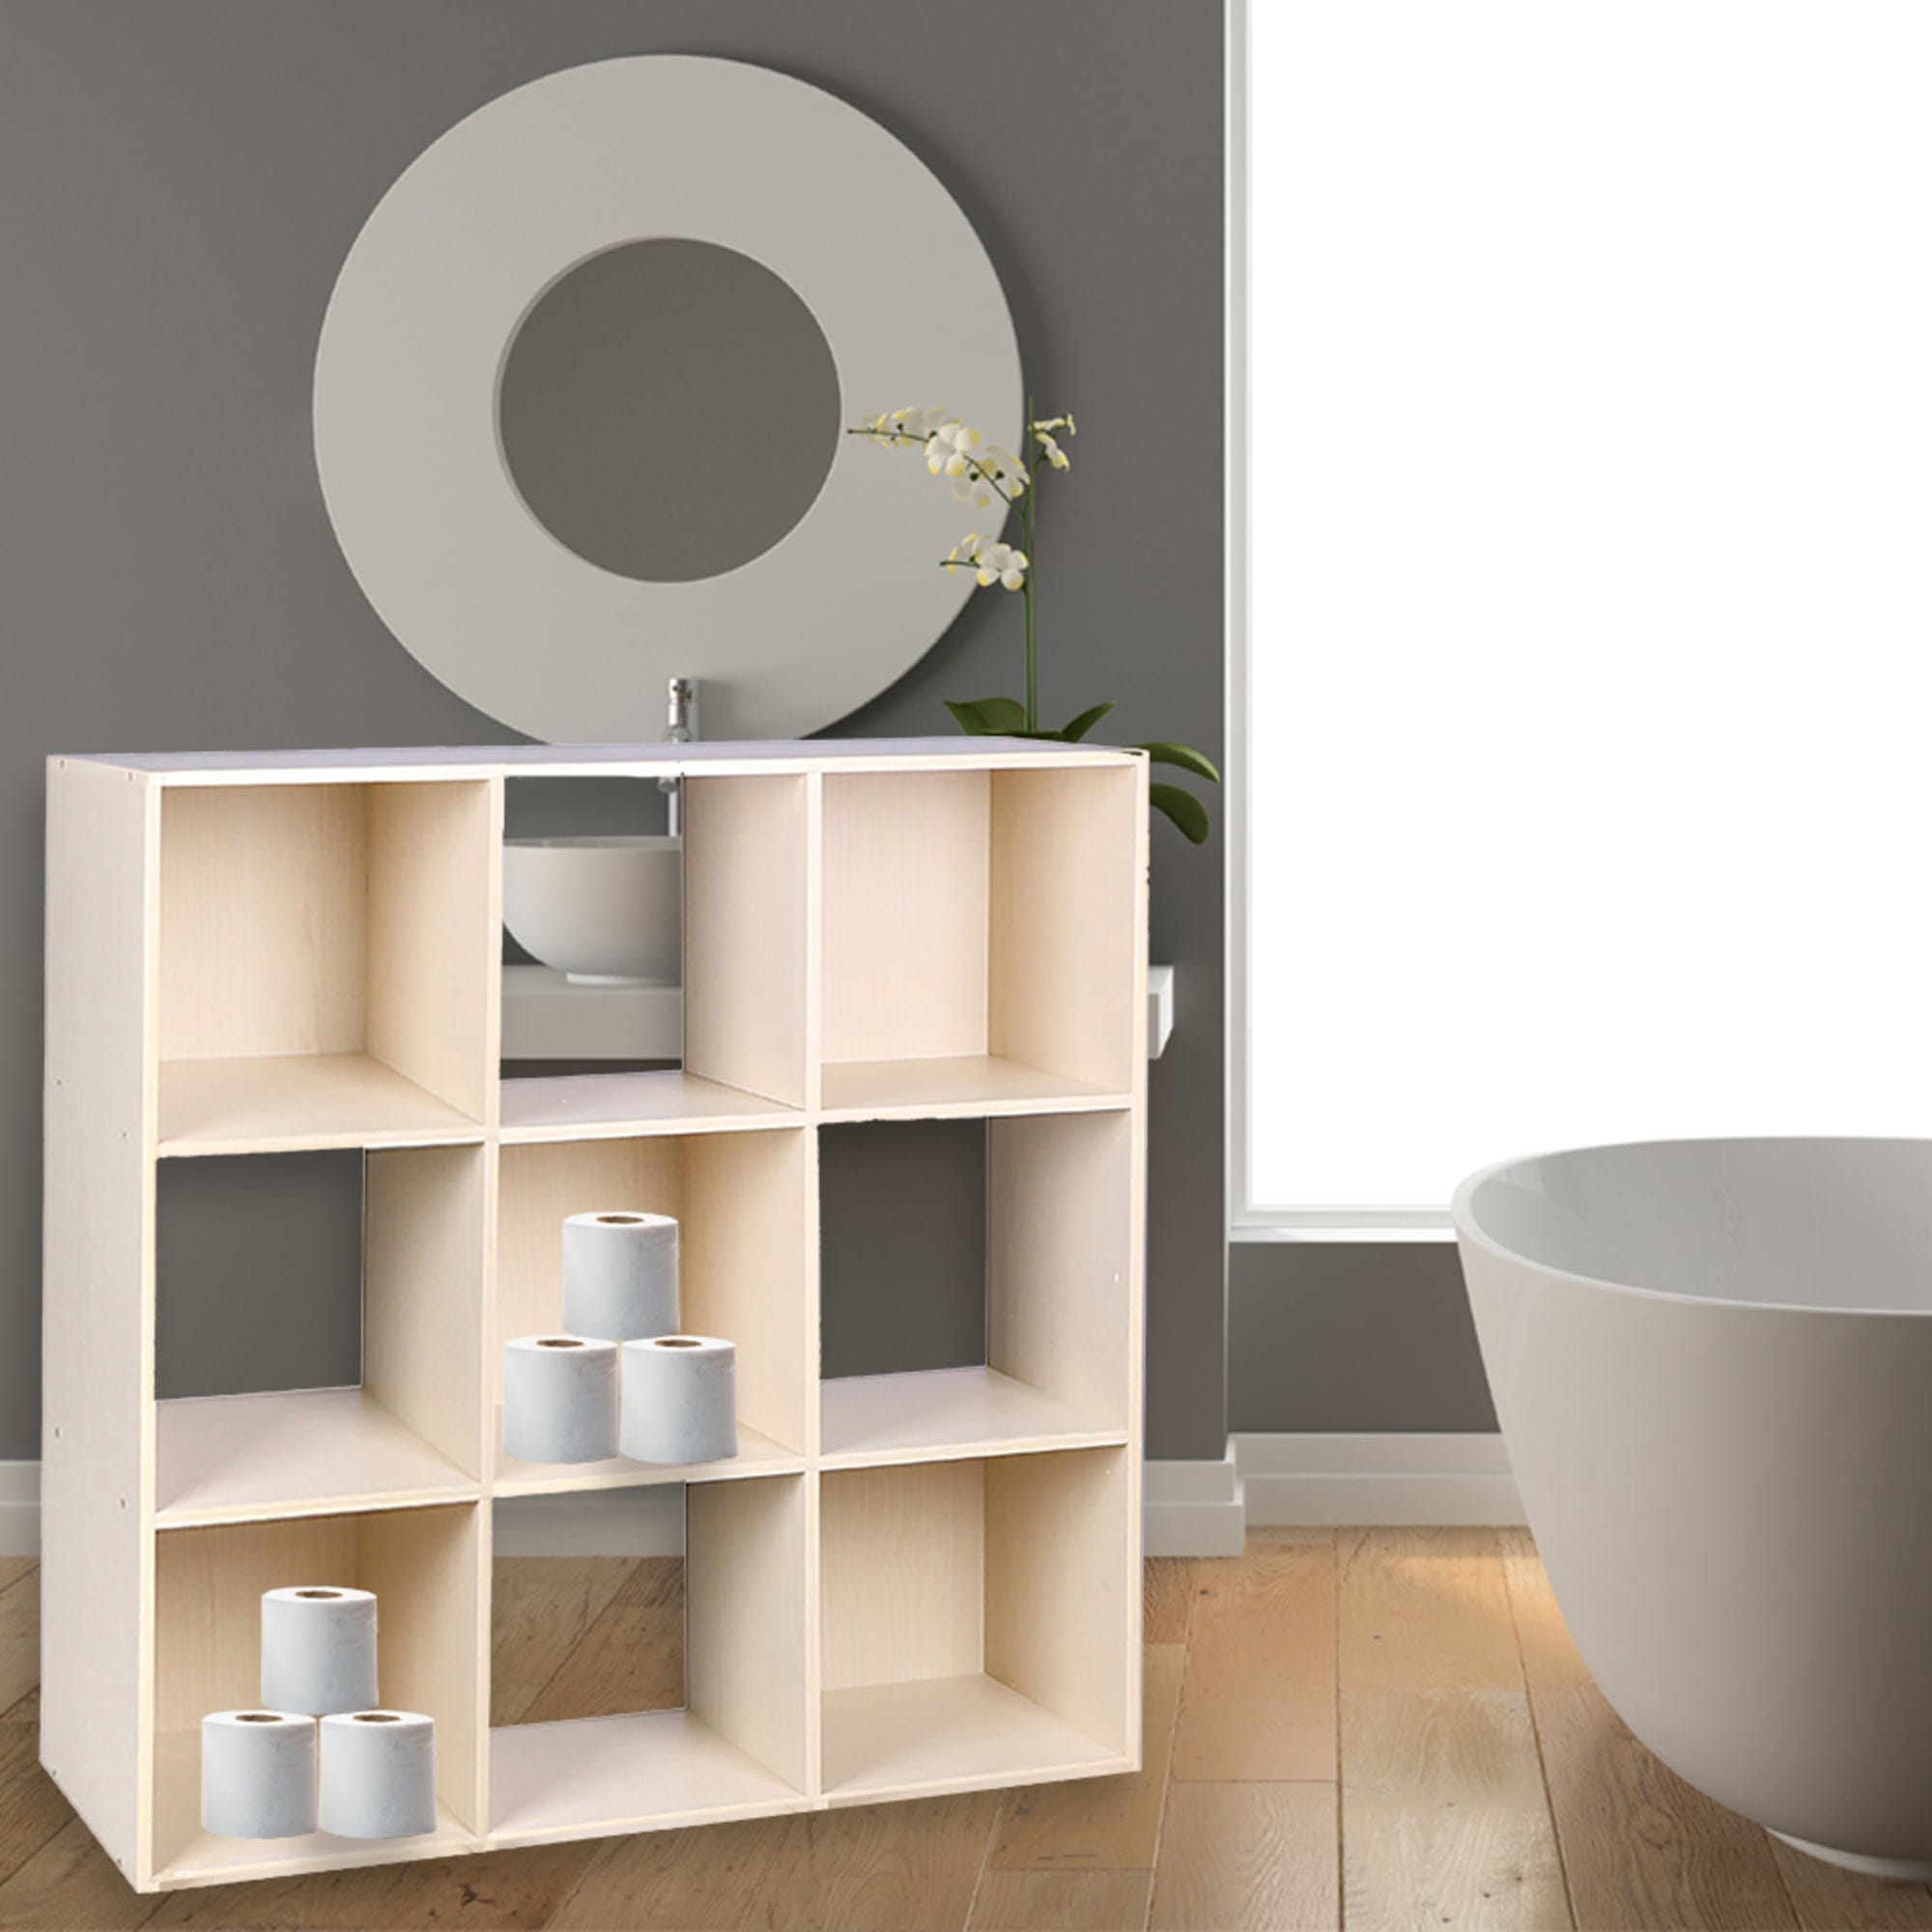 Home Basics Open and Enclosed  9 Cube MDF Storage Organizer, Oak $50.00 EACH, CASE PACK OF 1